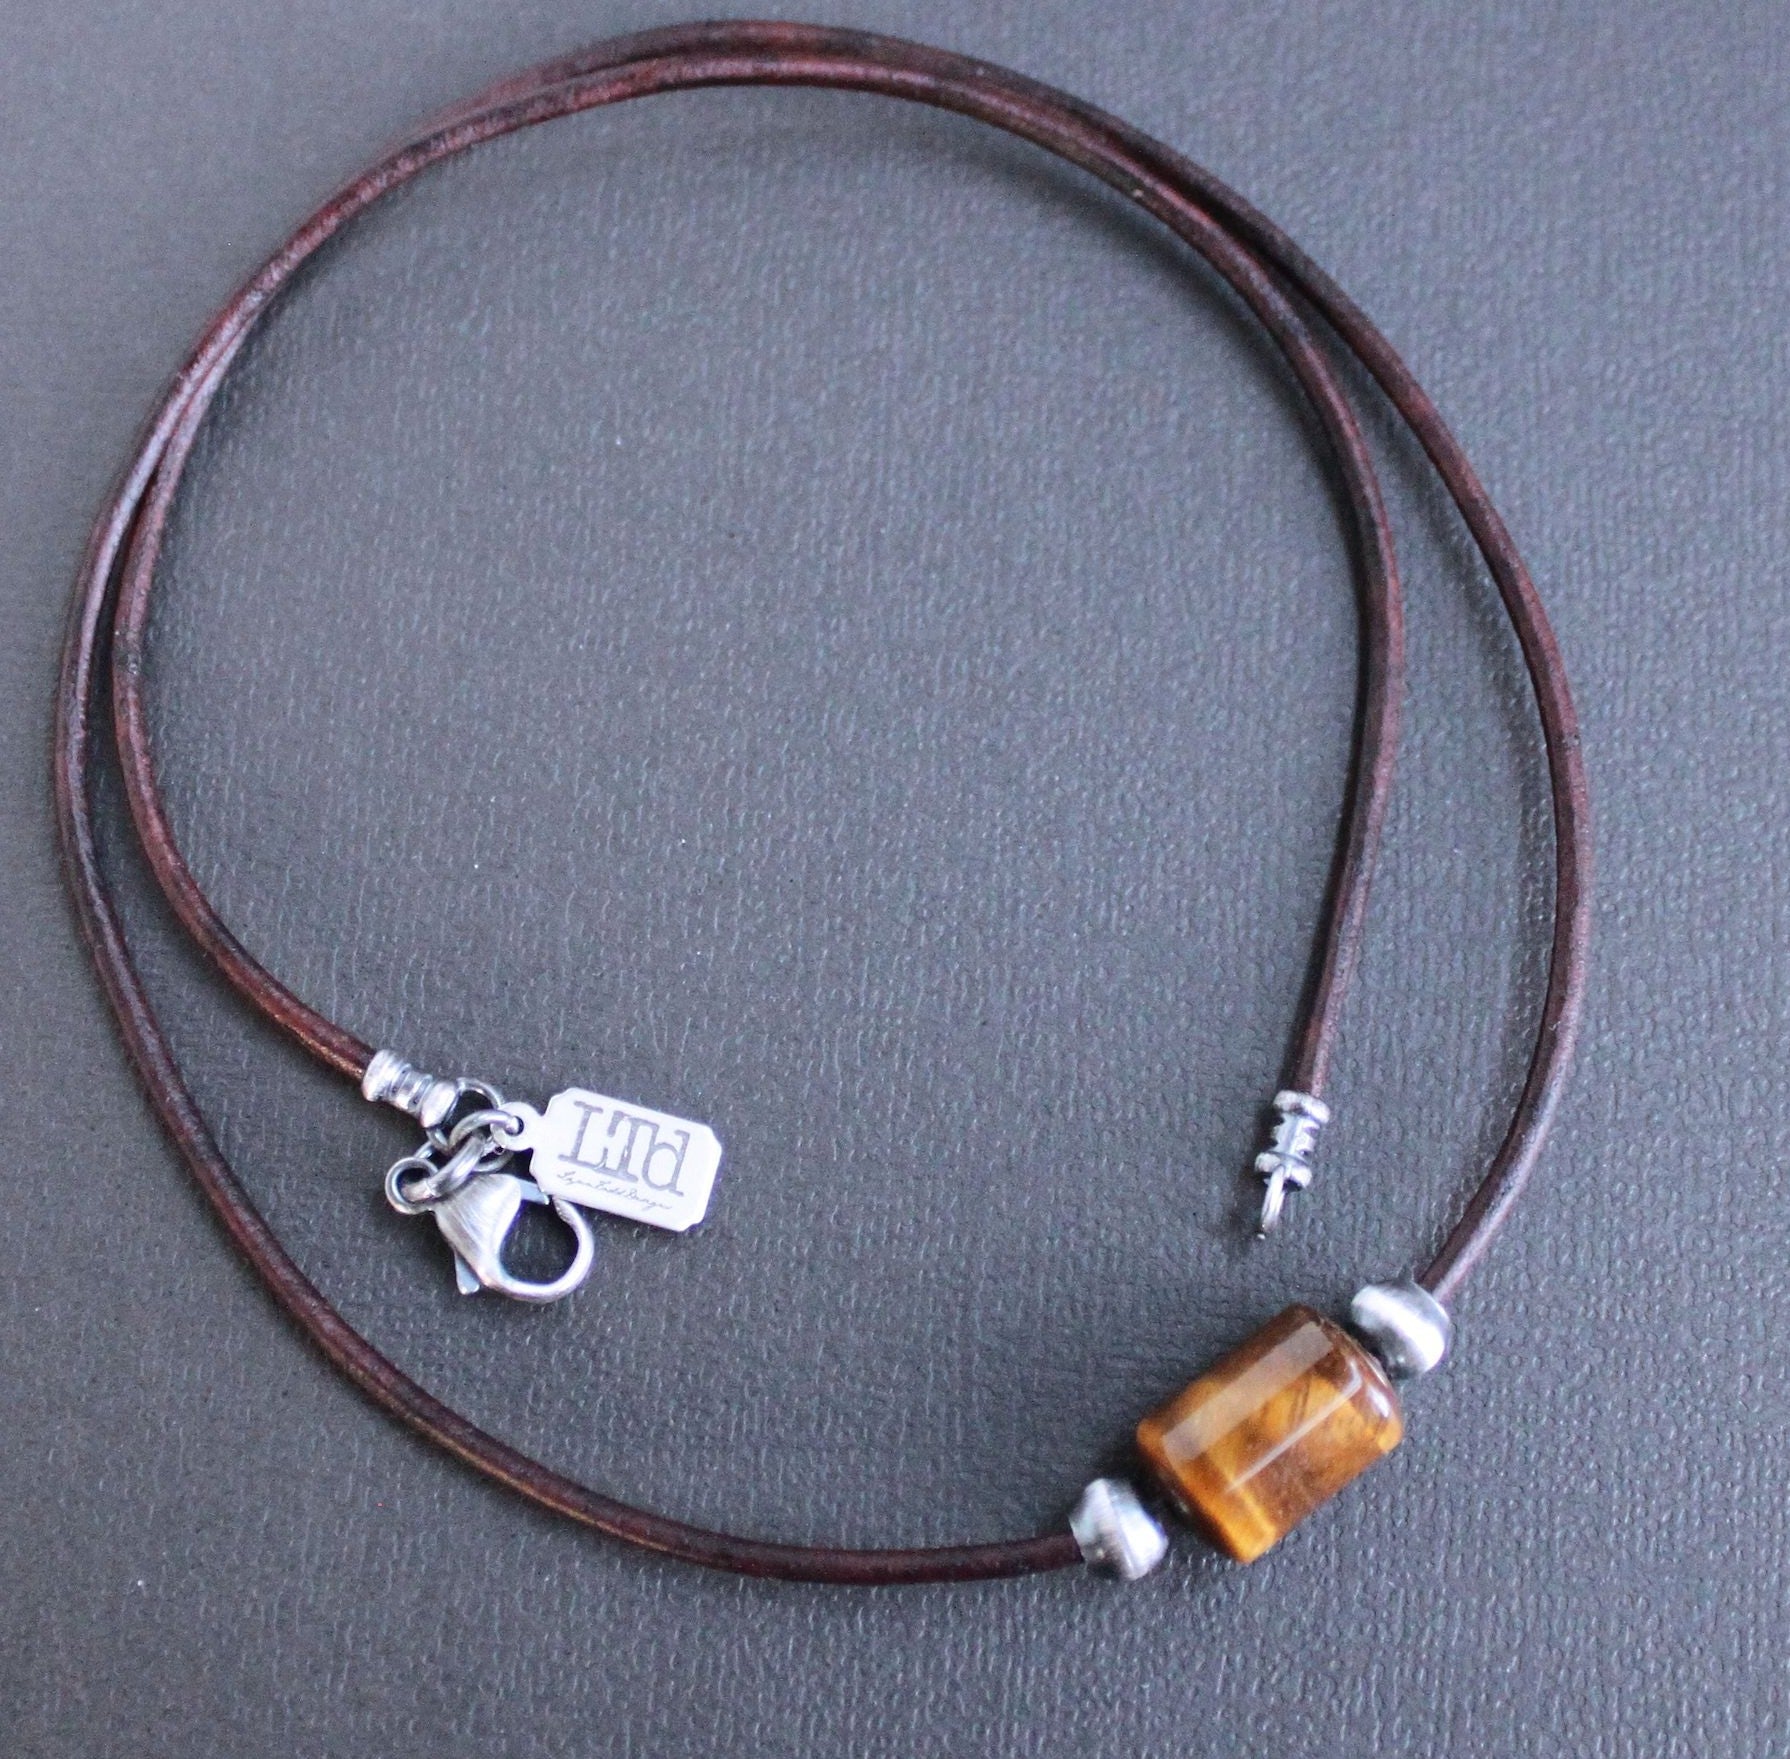 Men's Tiger Eye Barrel Bead Leather Cord Necklace 22 Inches / Black